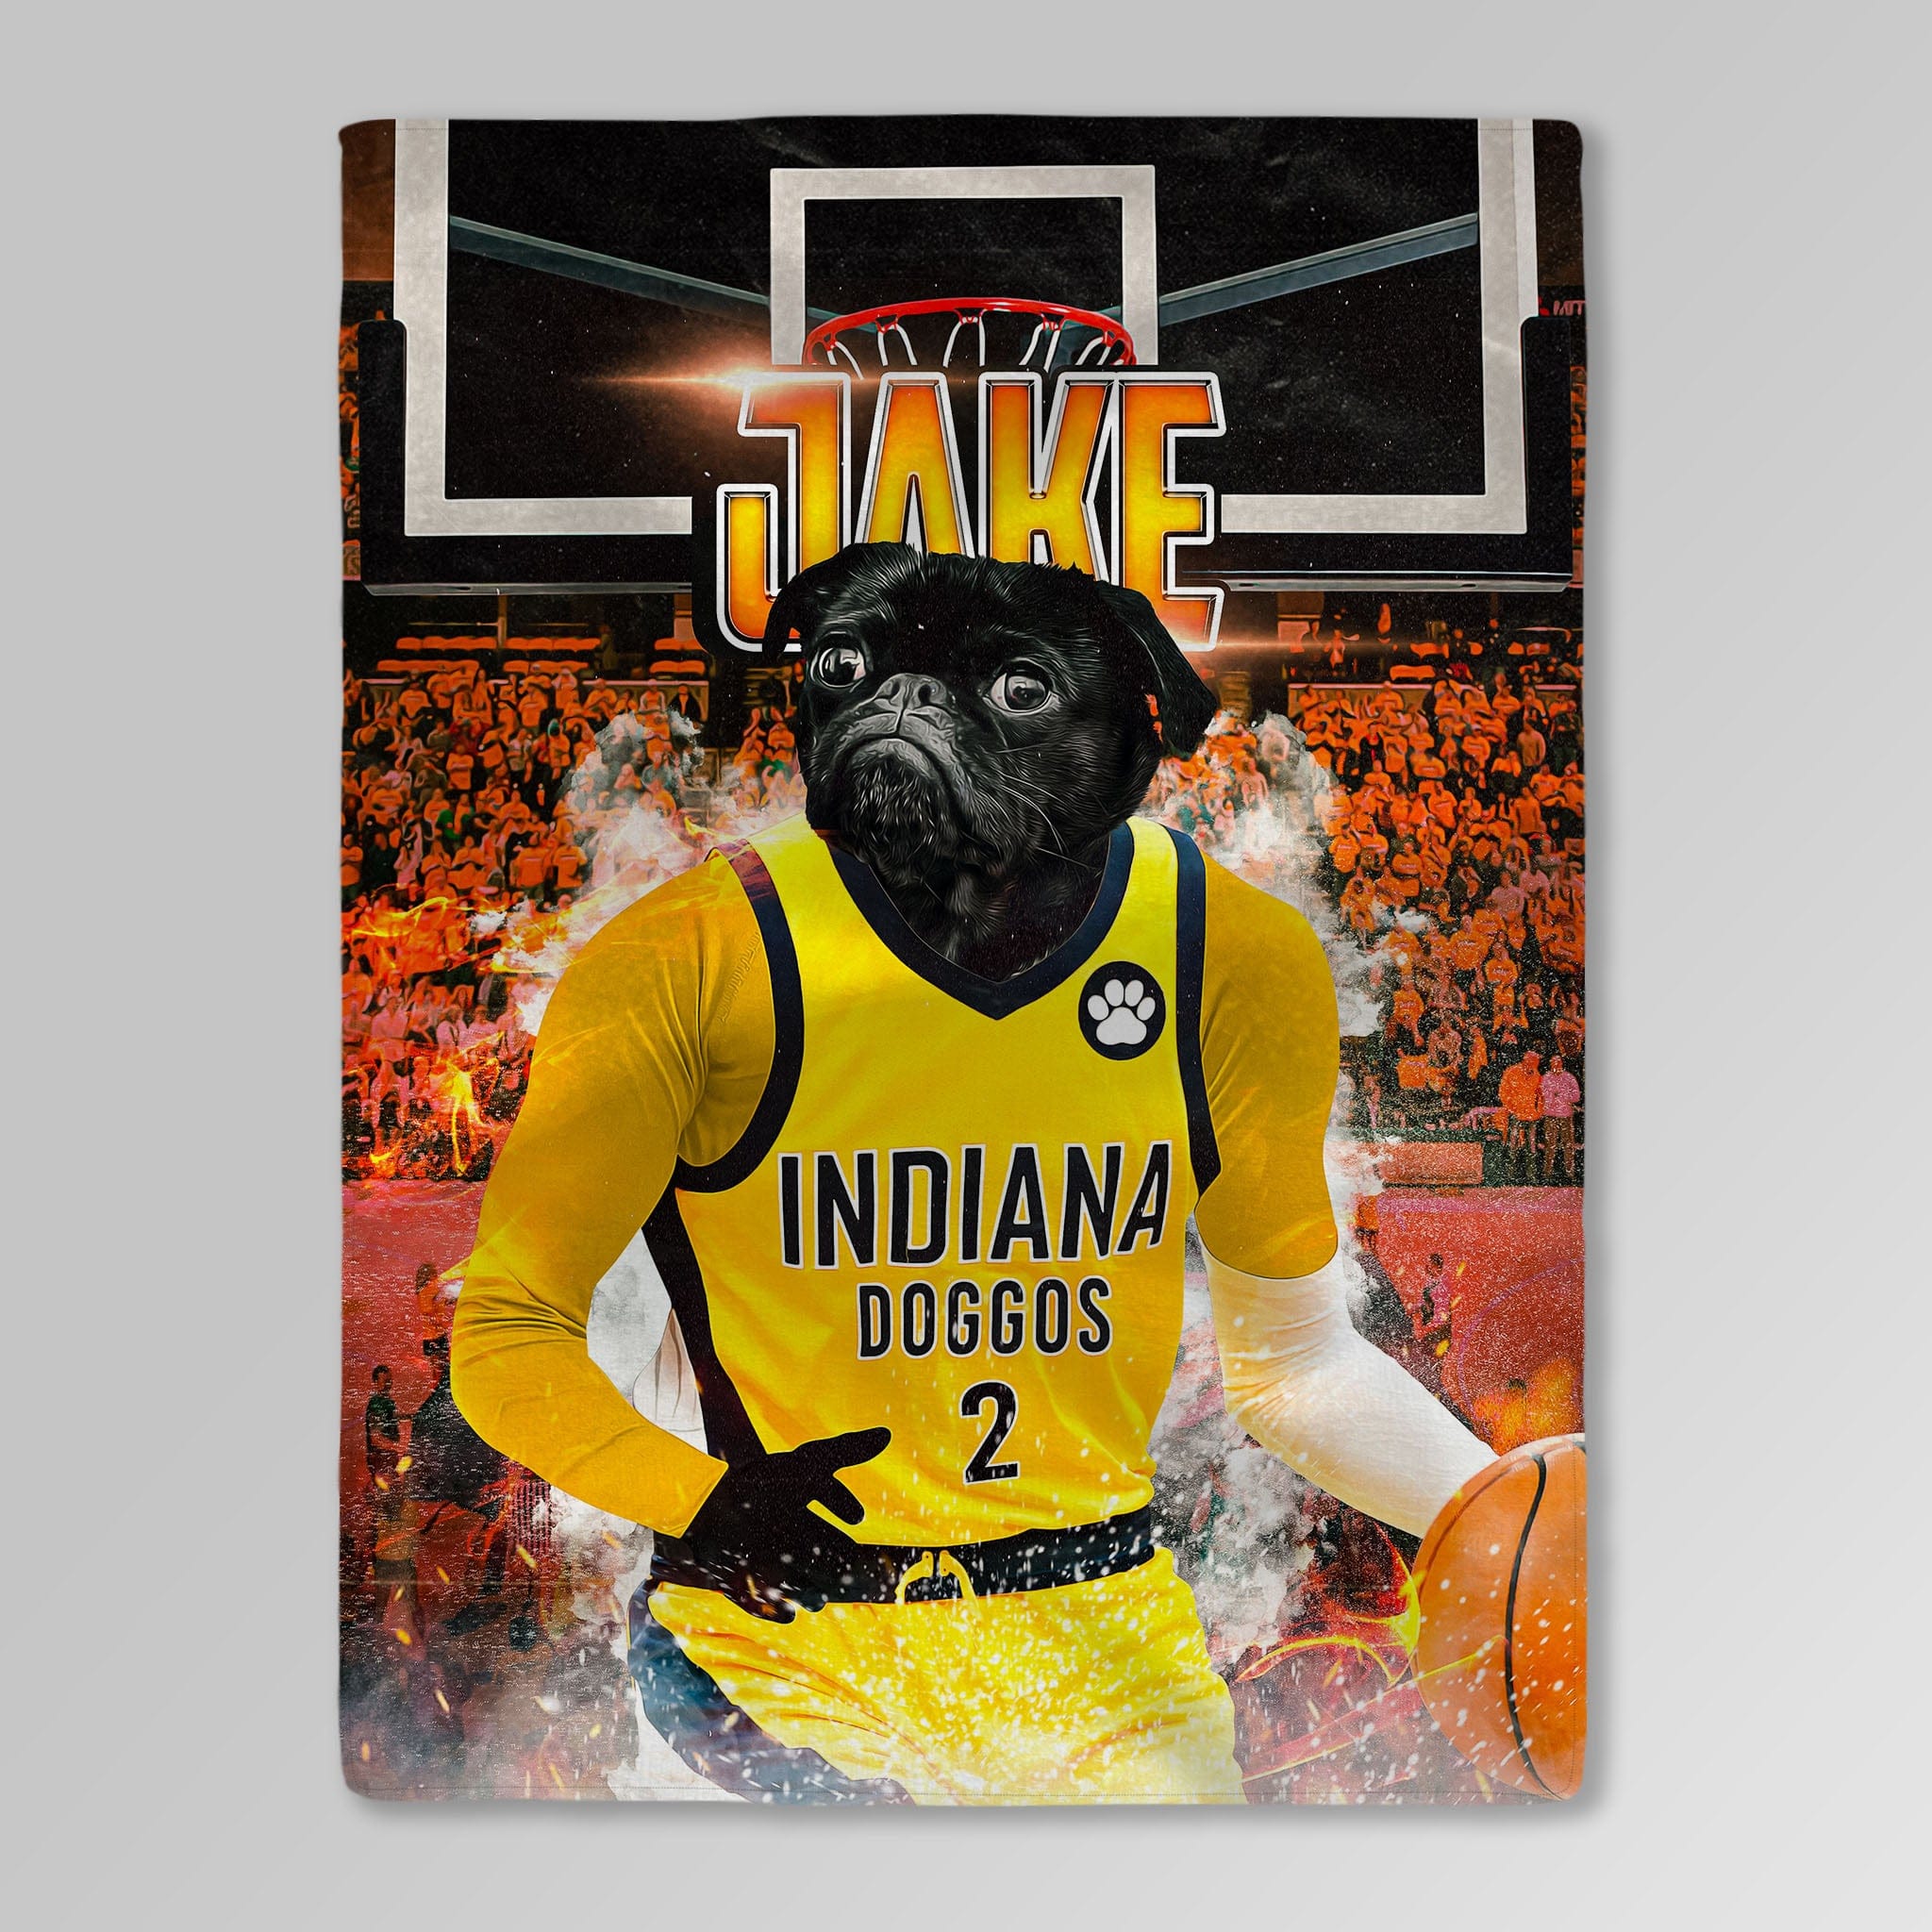 &#39;Indiana Pacers Doggos&#39; Personalized Pet Blanket